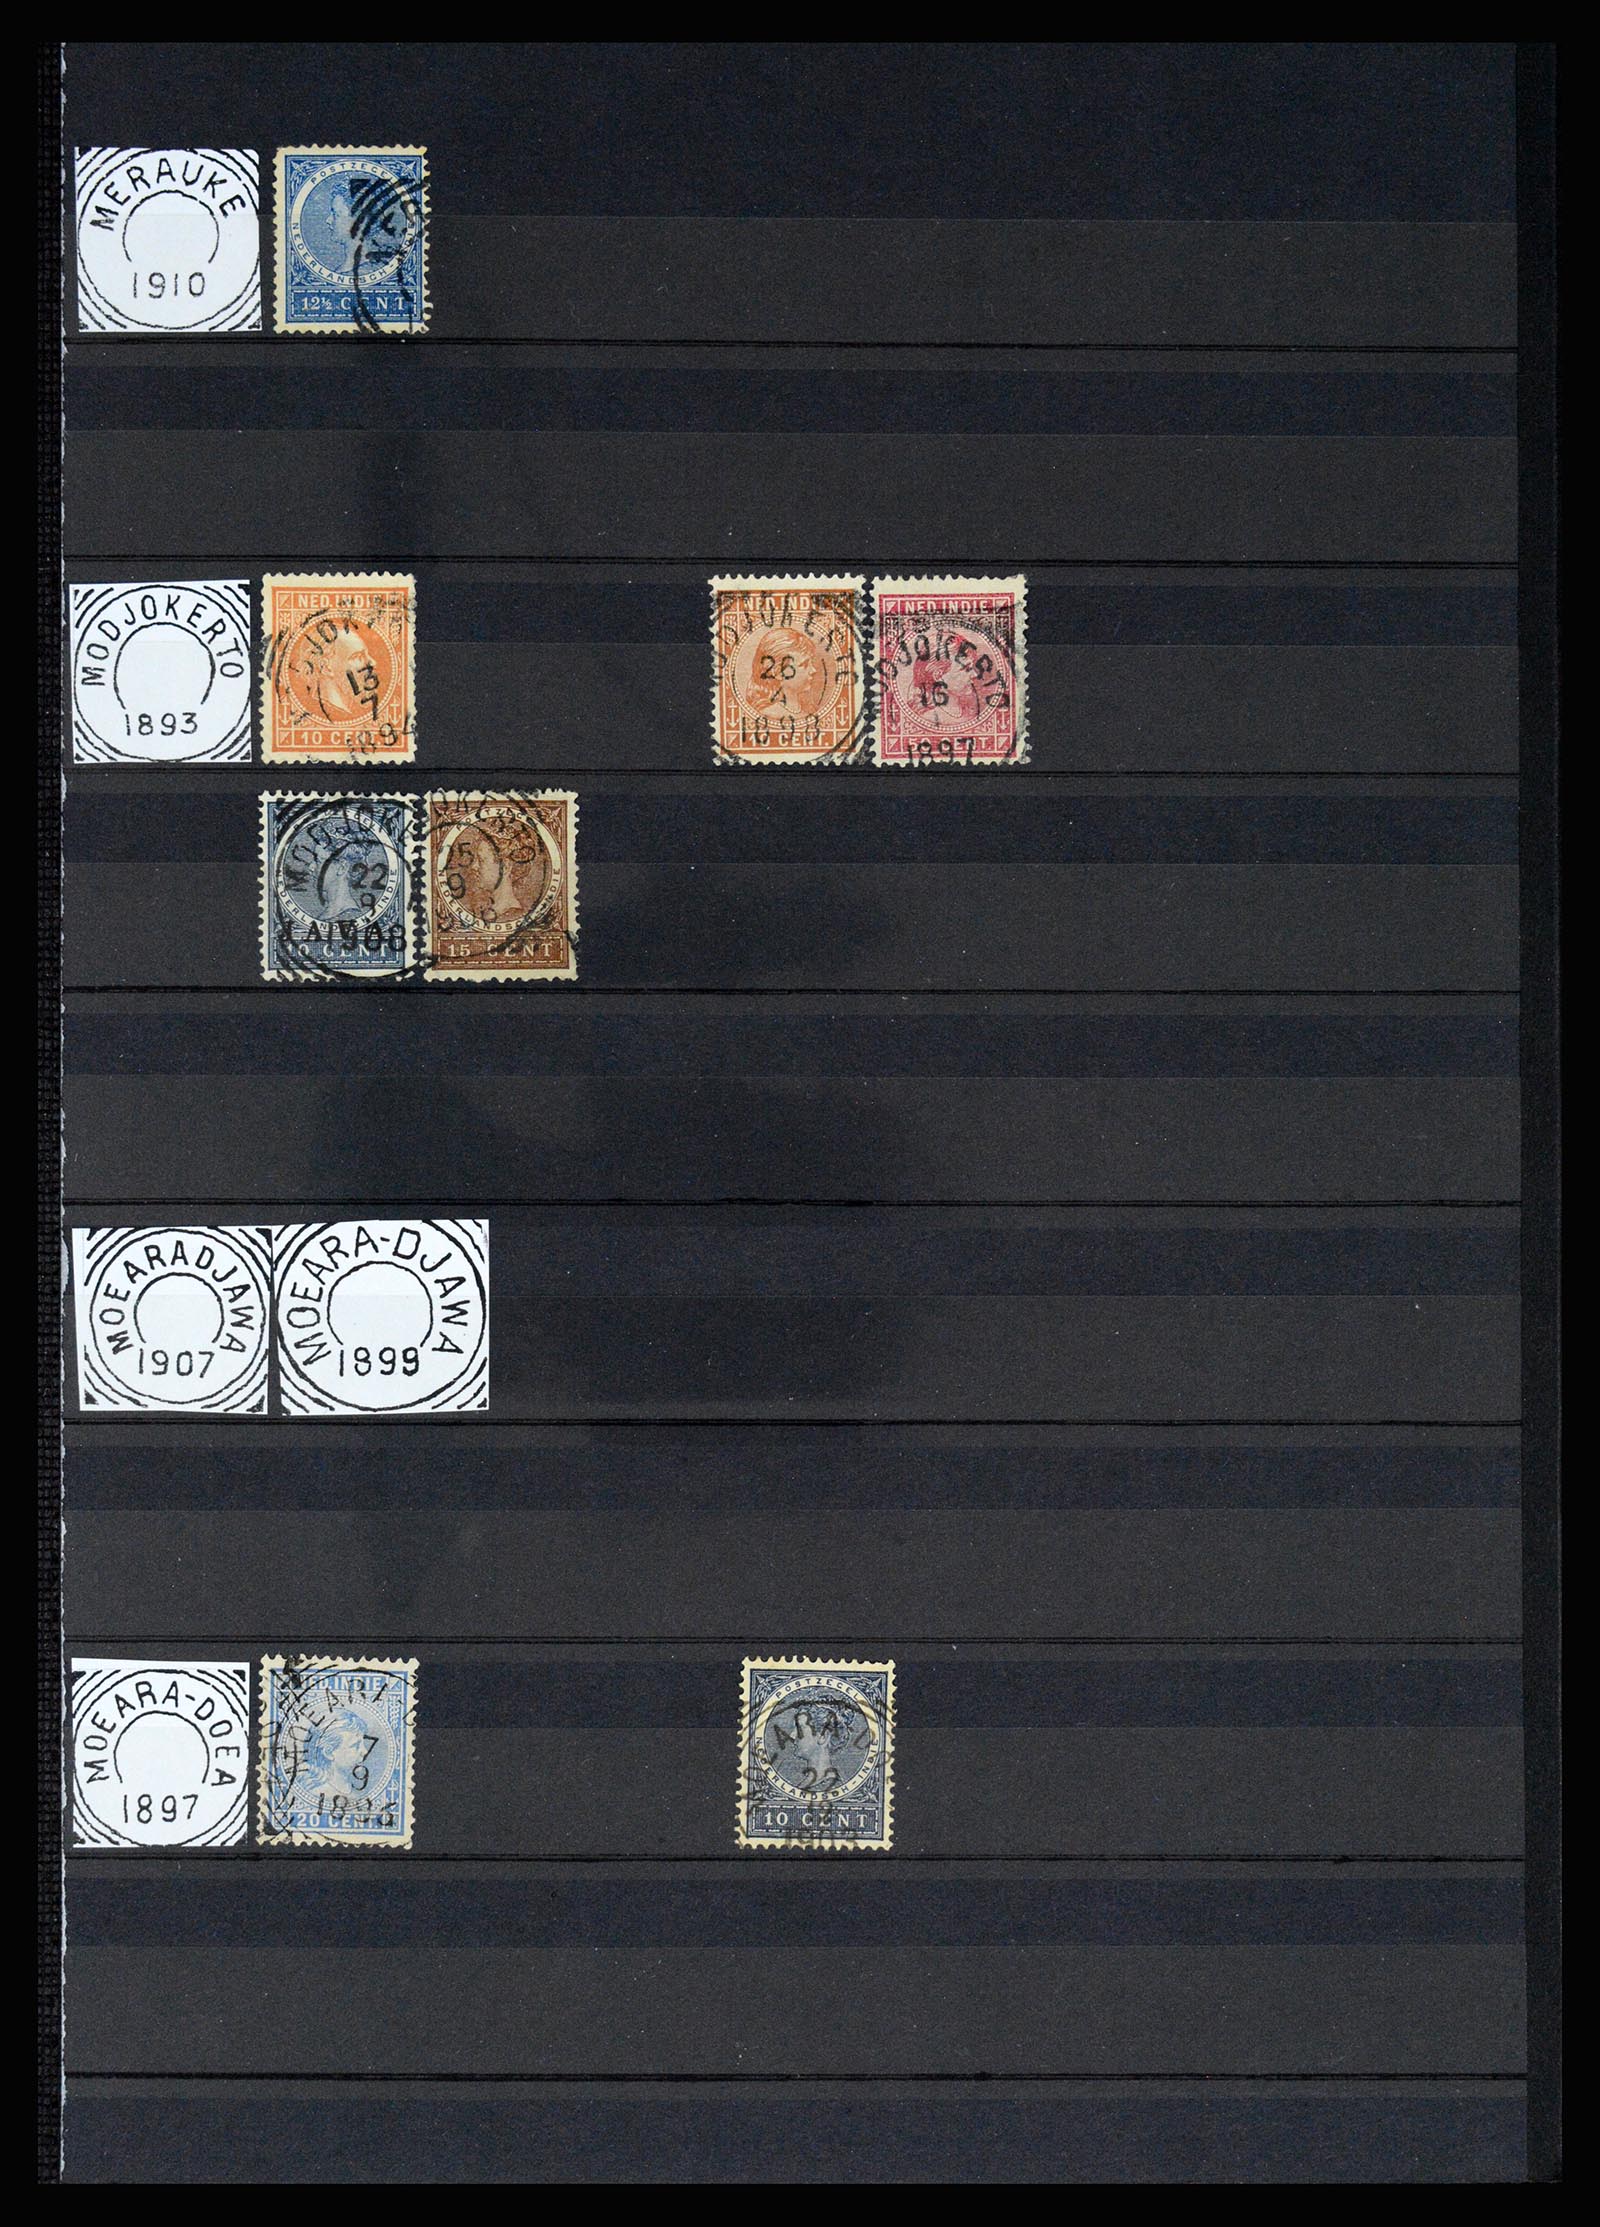 36839 030 - Stamp collection 36839 Dutch east Indies square cancels.